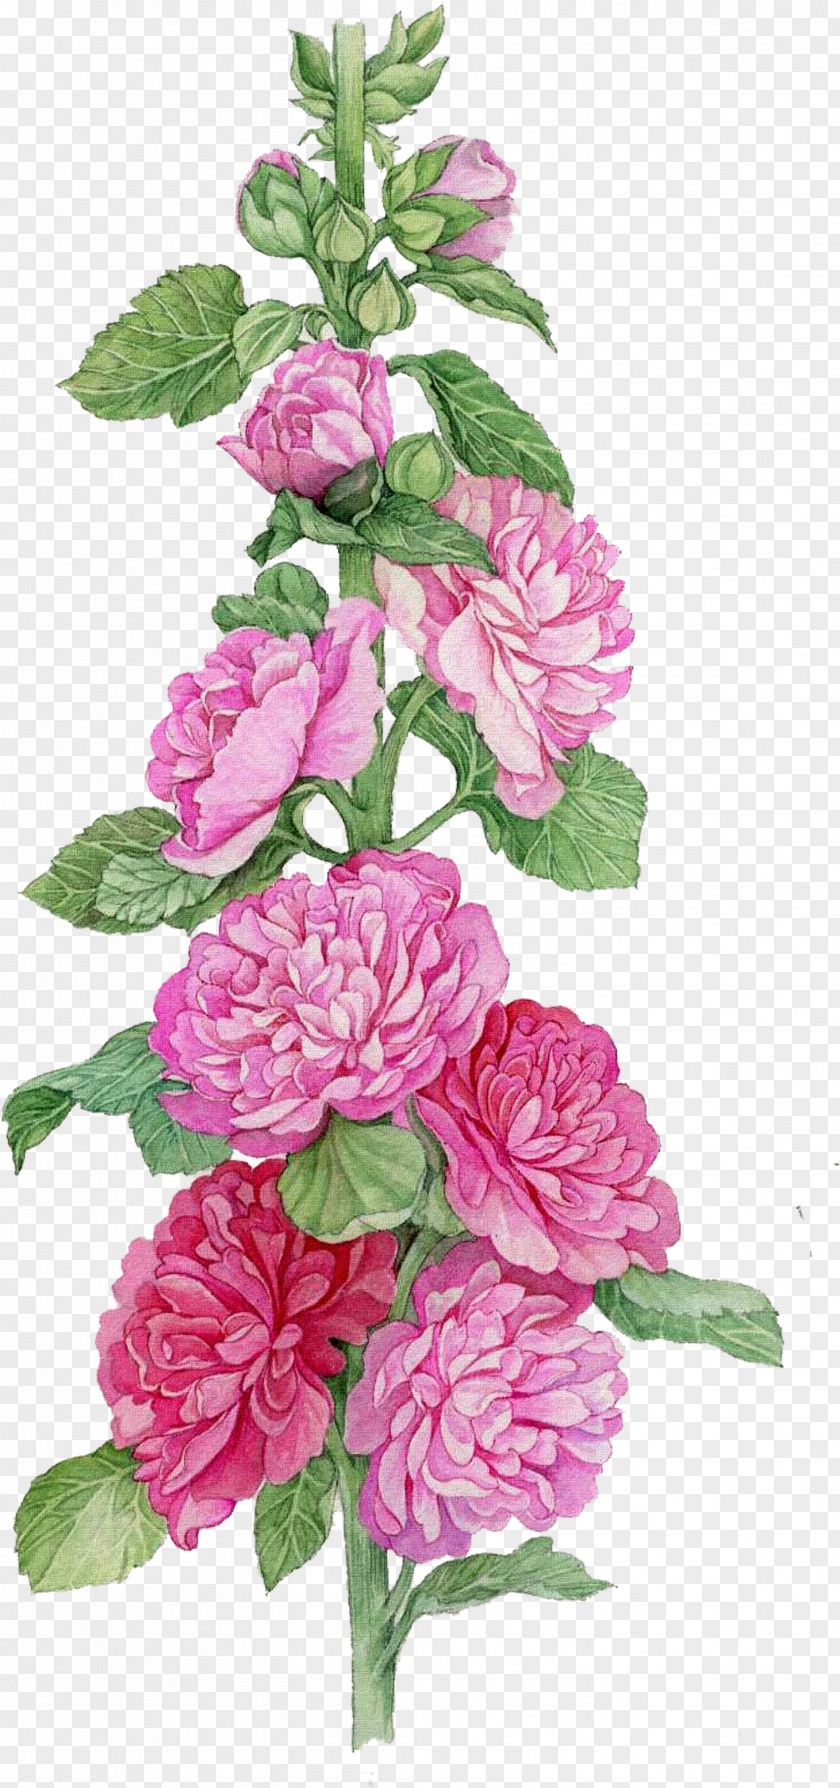 Hydrangea China Rose Watercolor Pink Flowers PNG